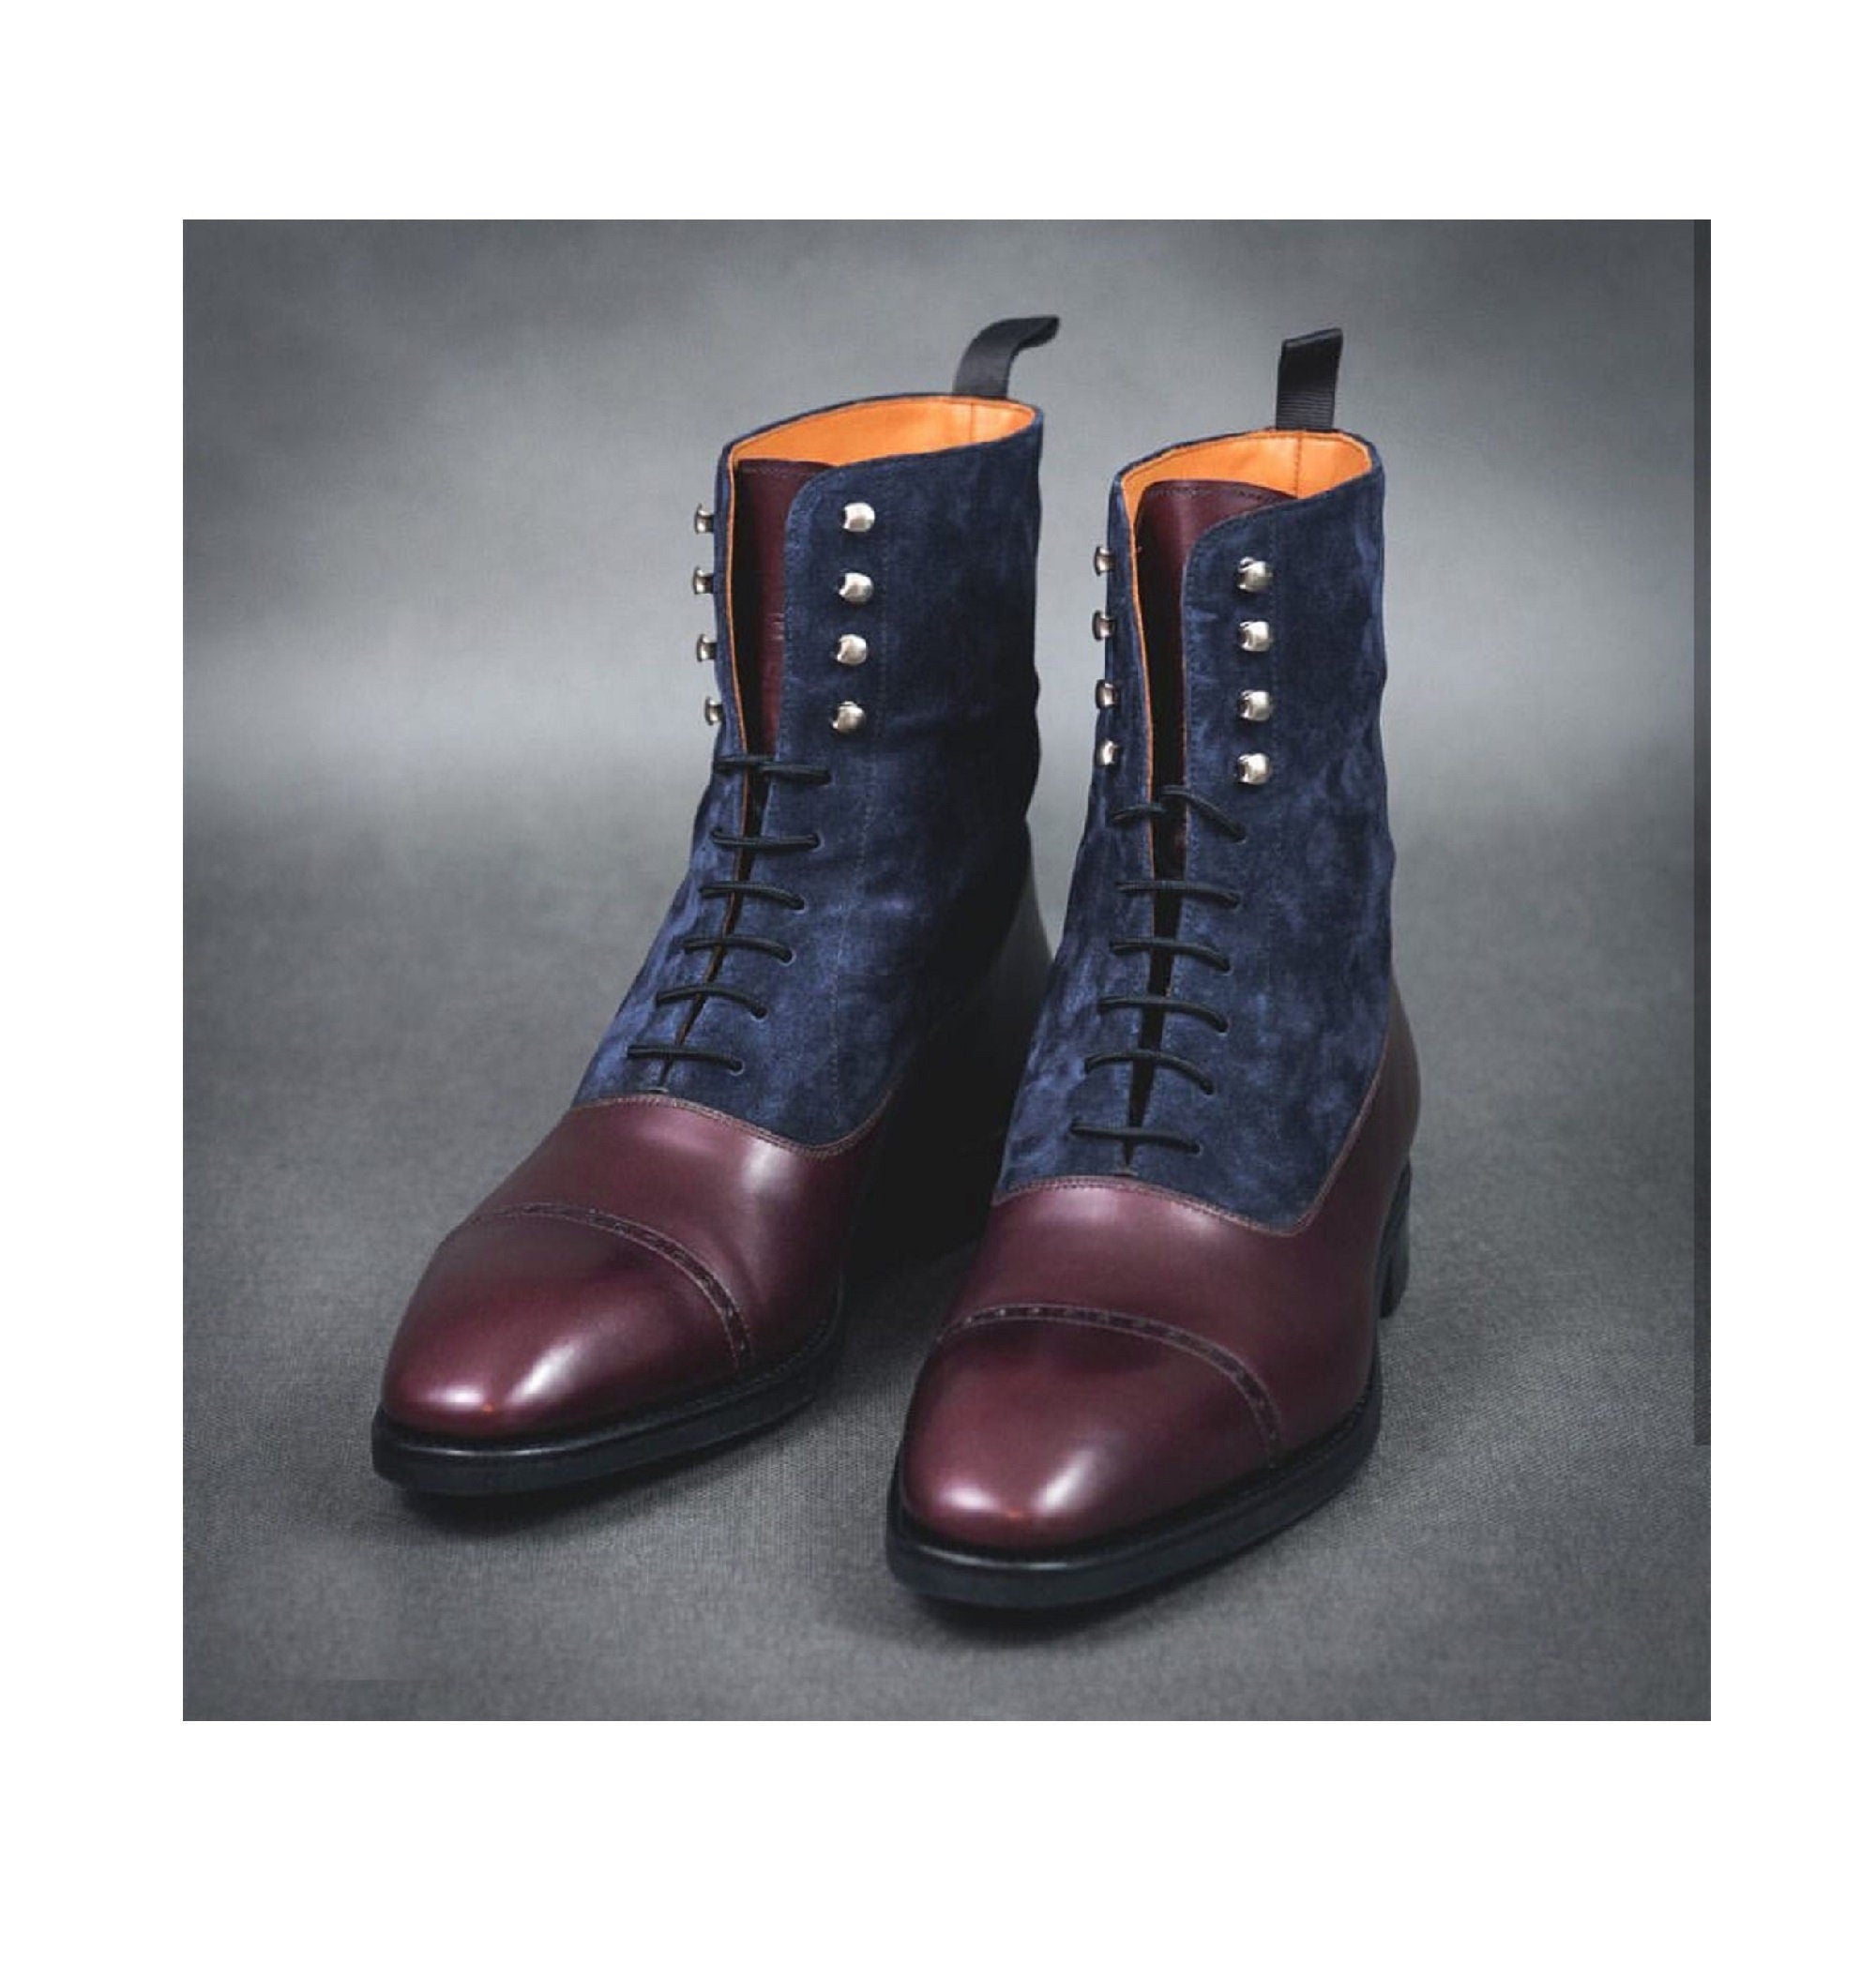 Pure Handmade Maroon & Navy Blue Cap Toe Ankle High Leather Suede Lace Up Boots For Men's